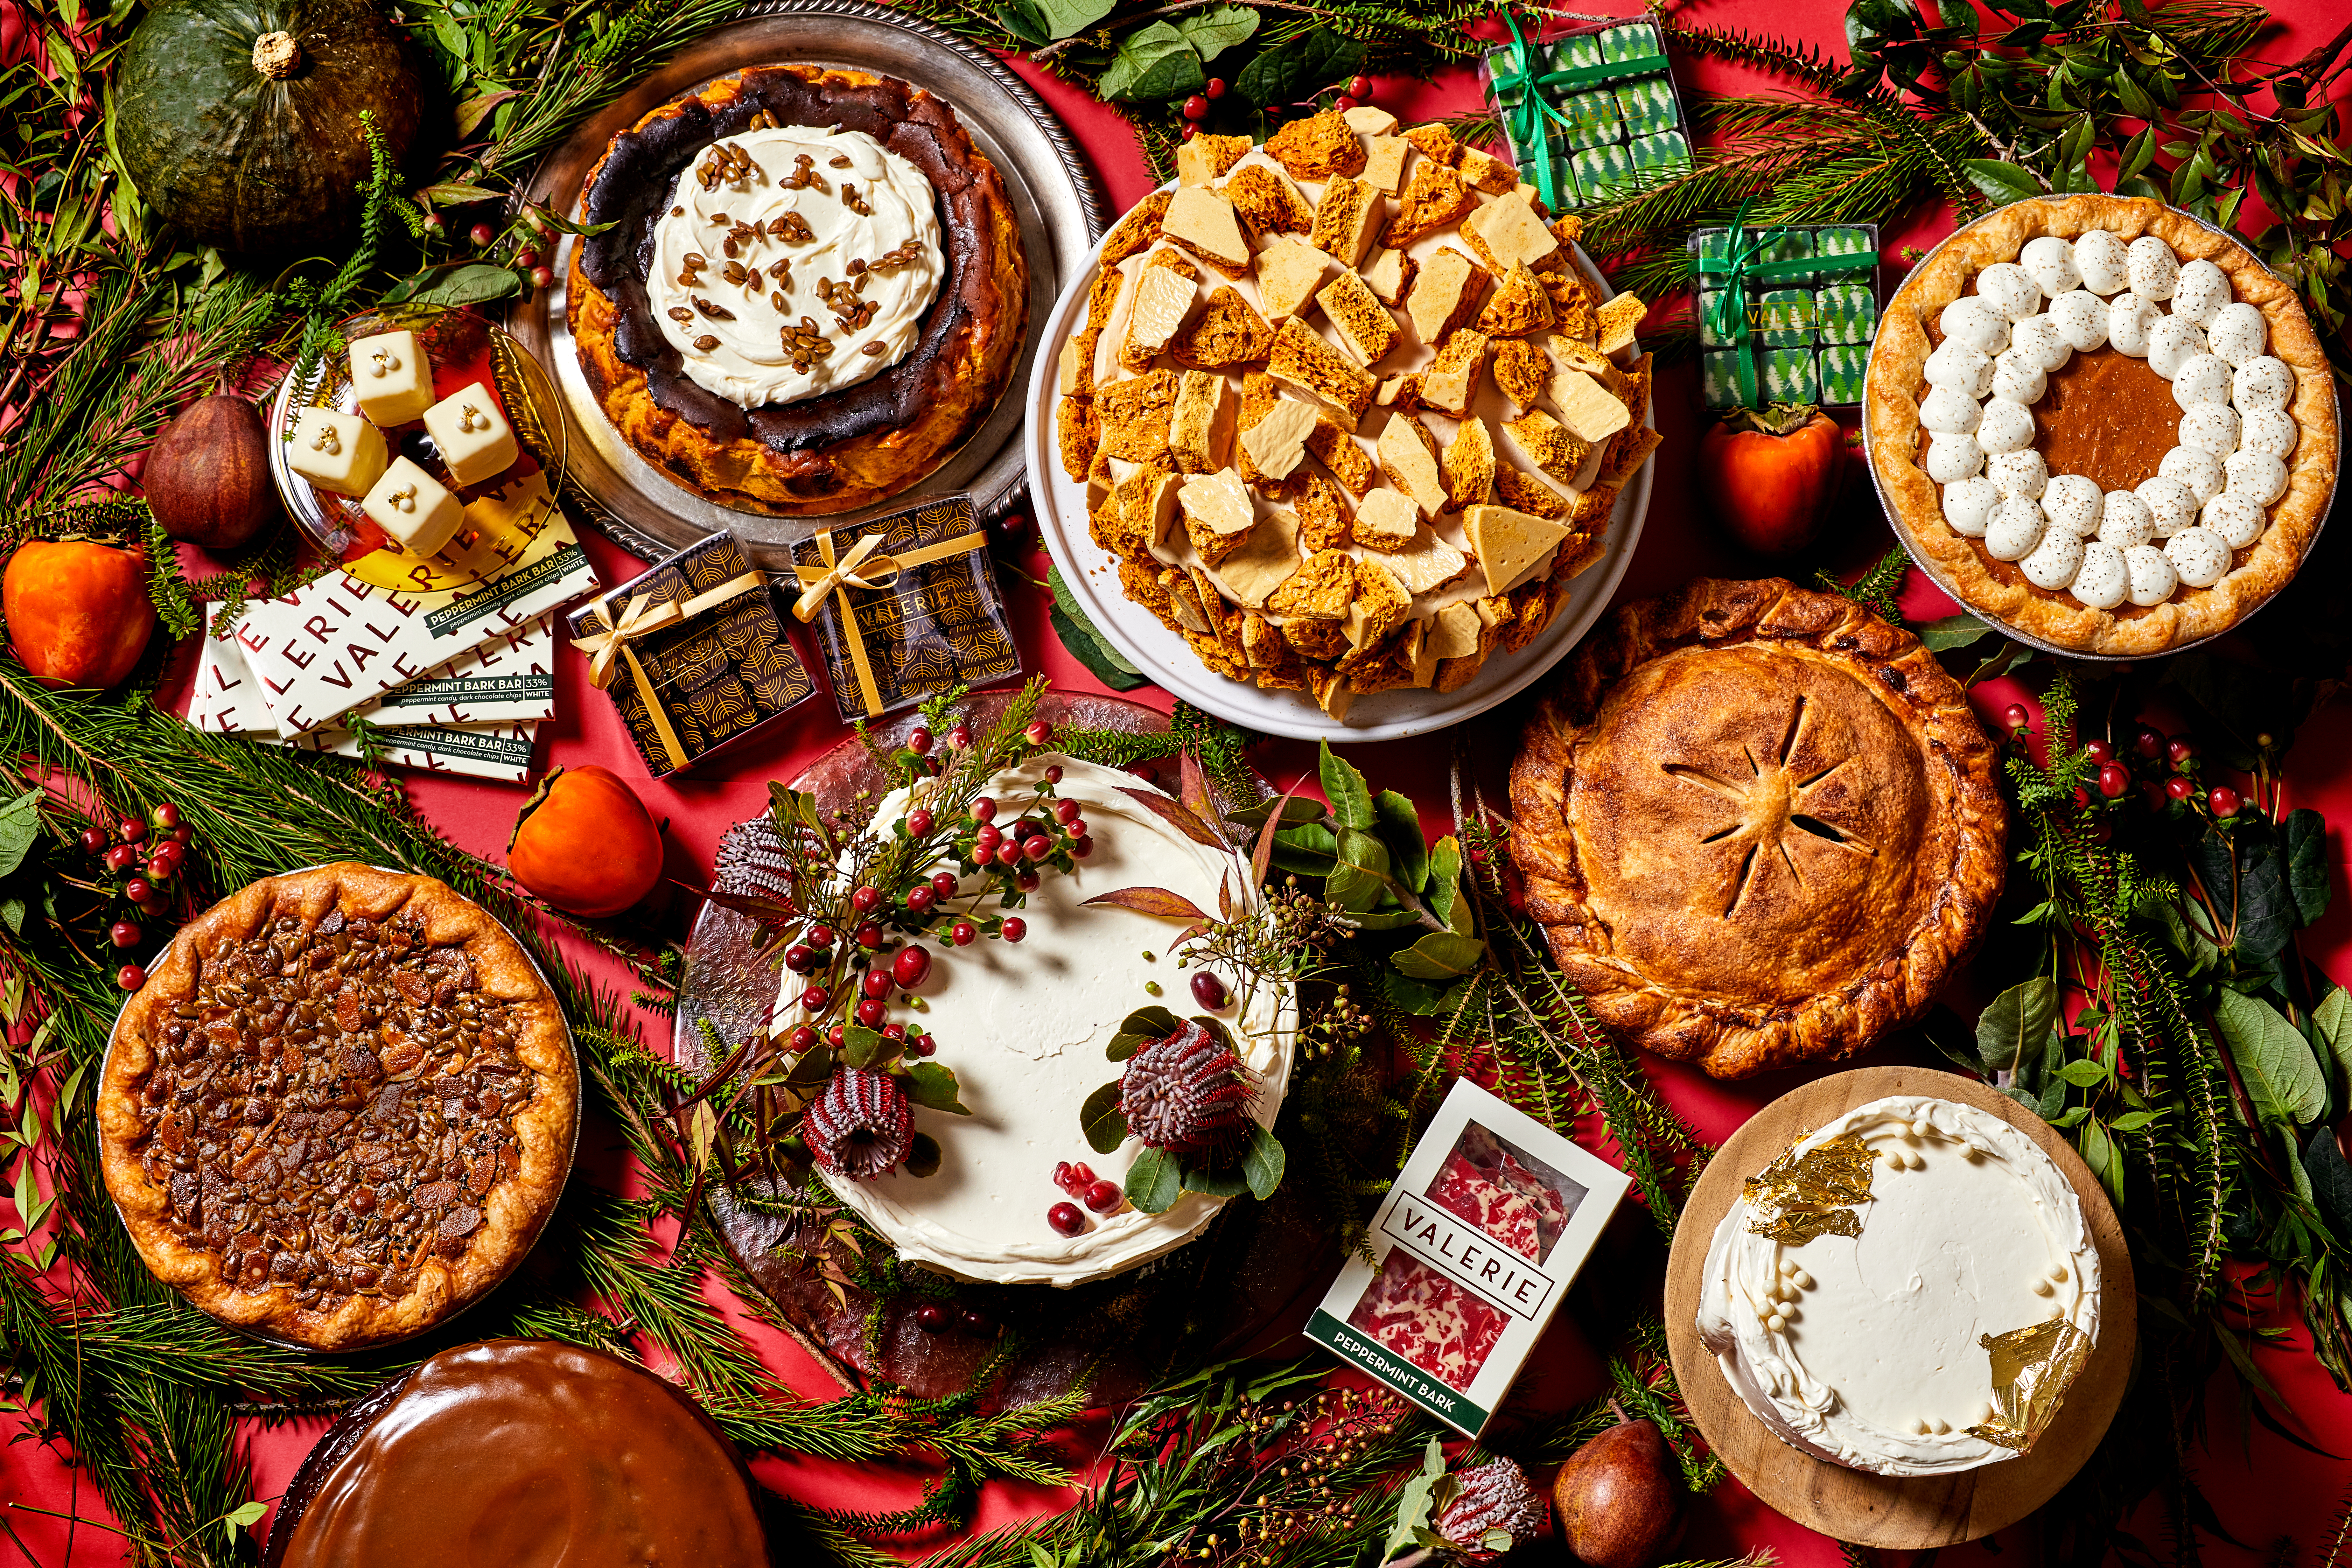 An assortment of pies by Valerie Confections.